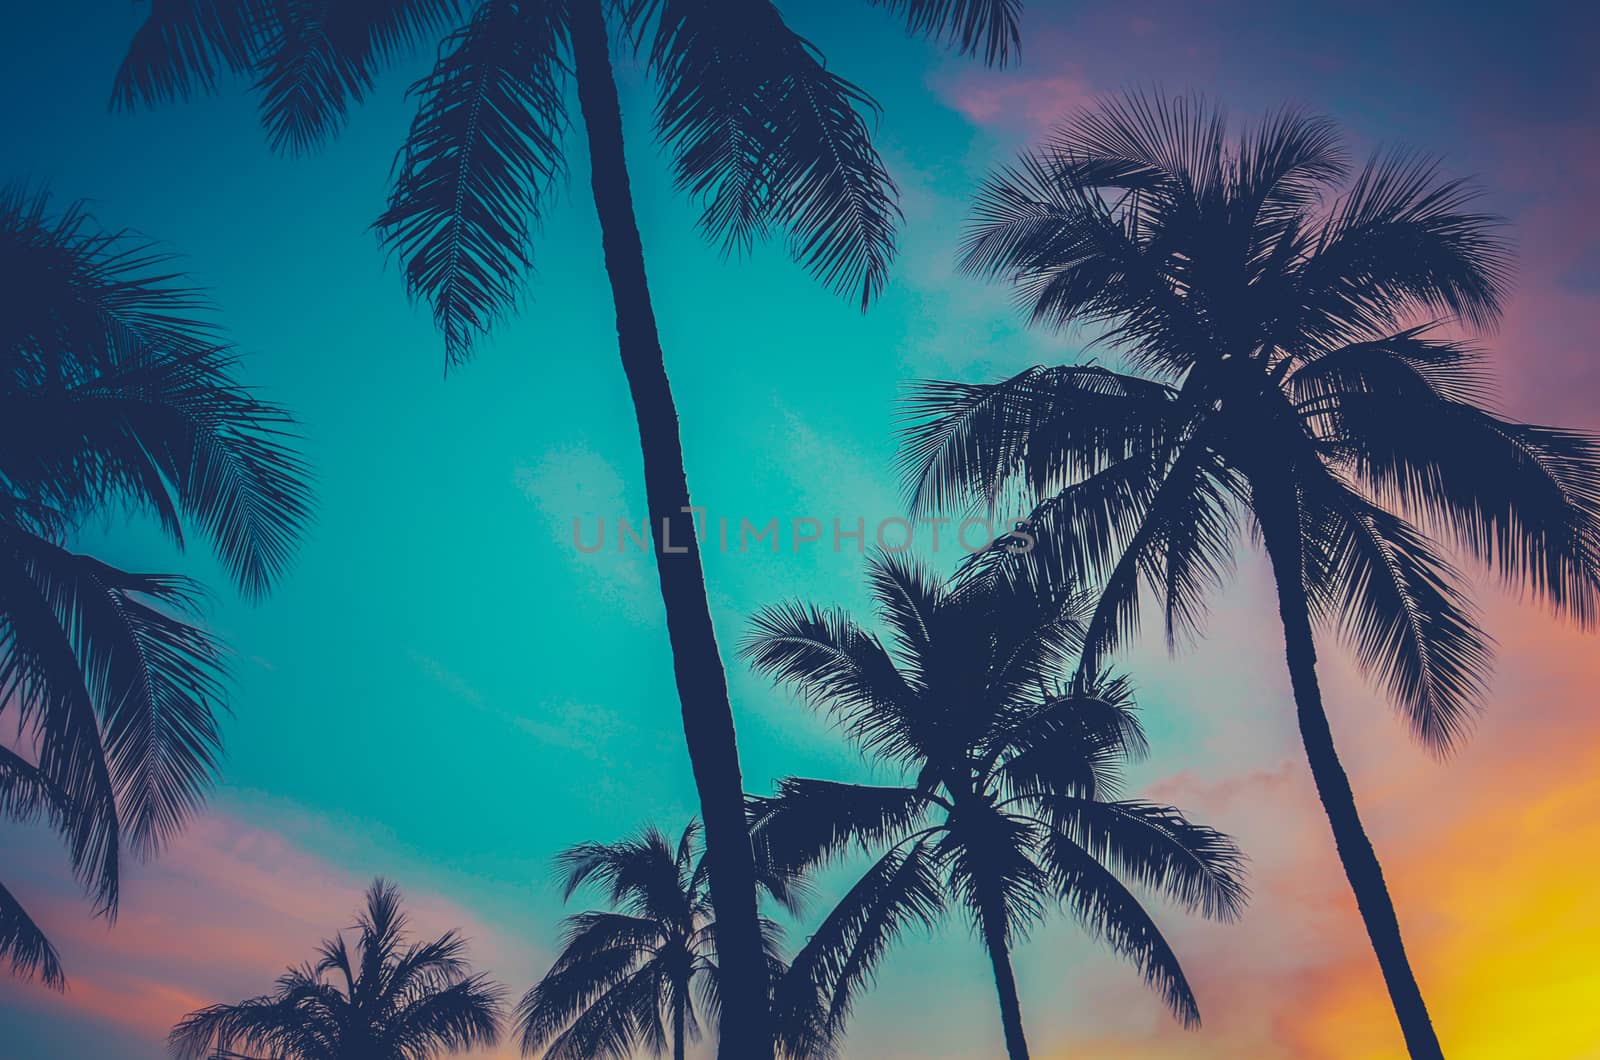 Vintage Retro Filtered Hawaii Palm Trees At Sunset